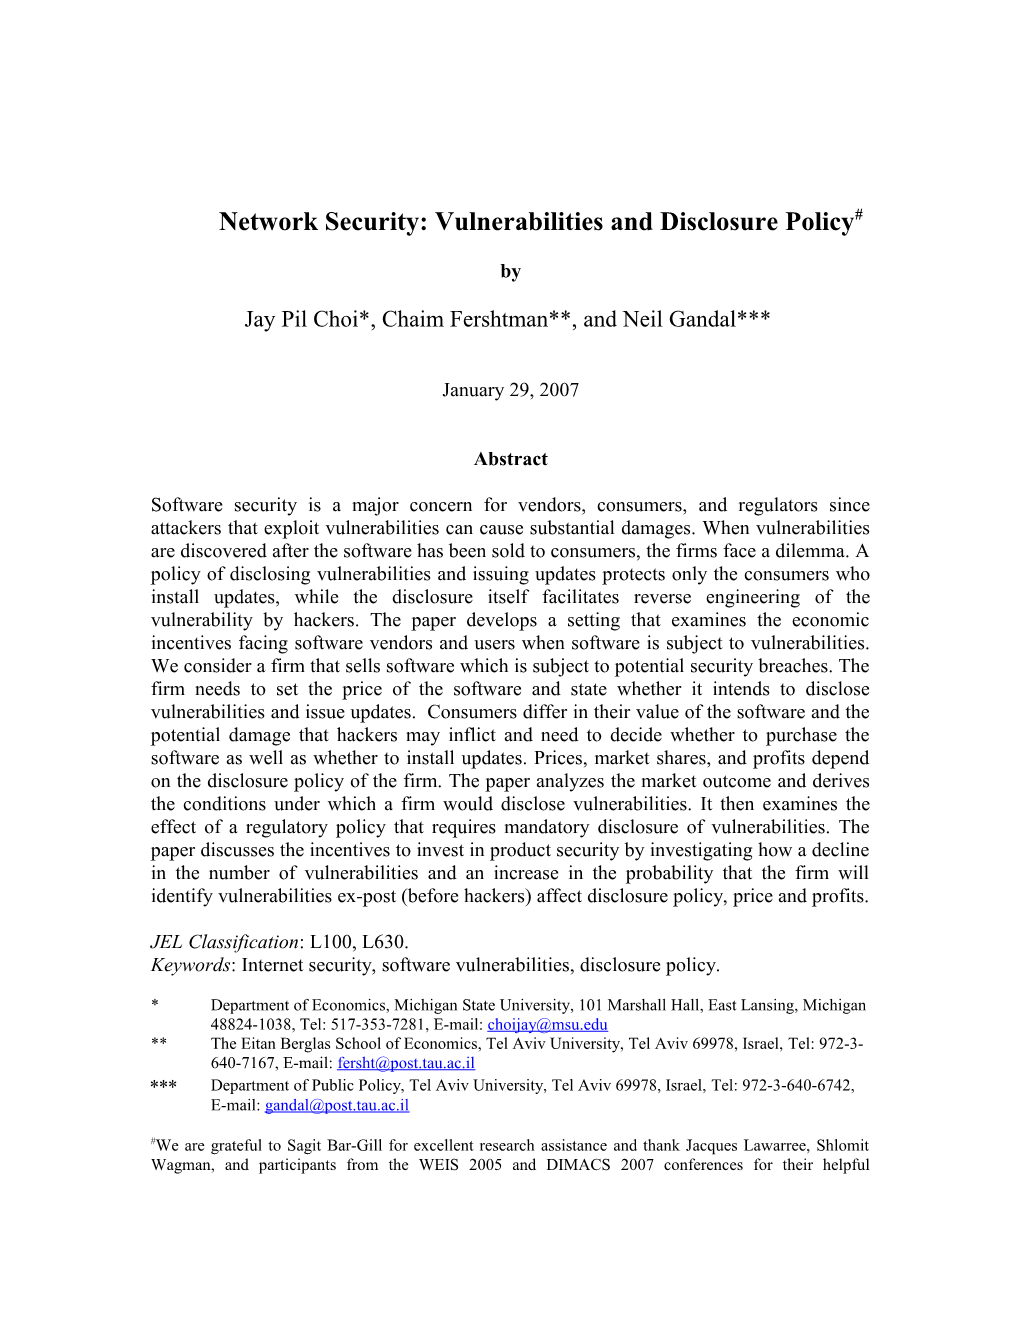 Internet Security and Vulnerability Disclosure